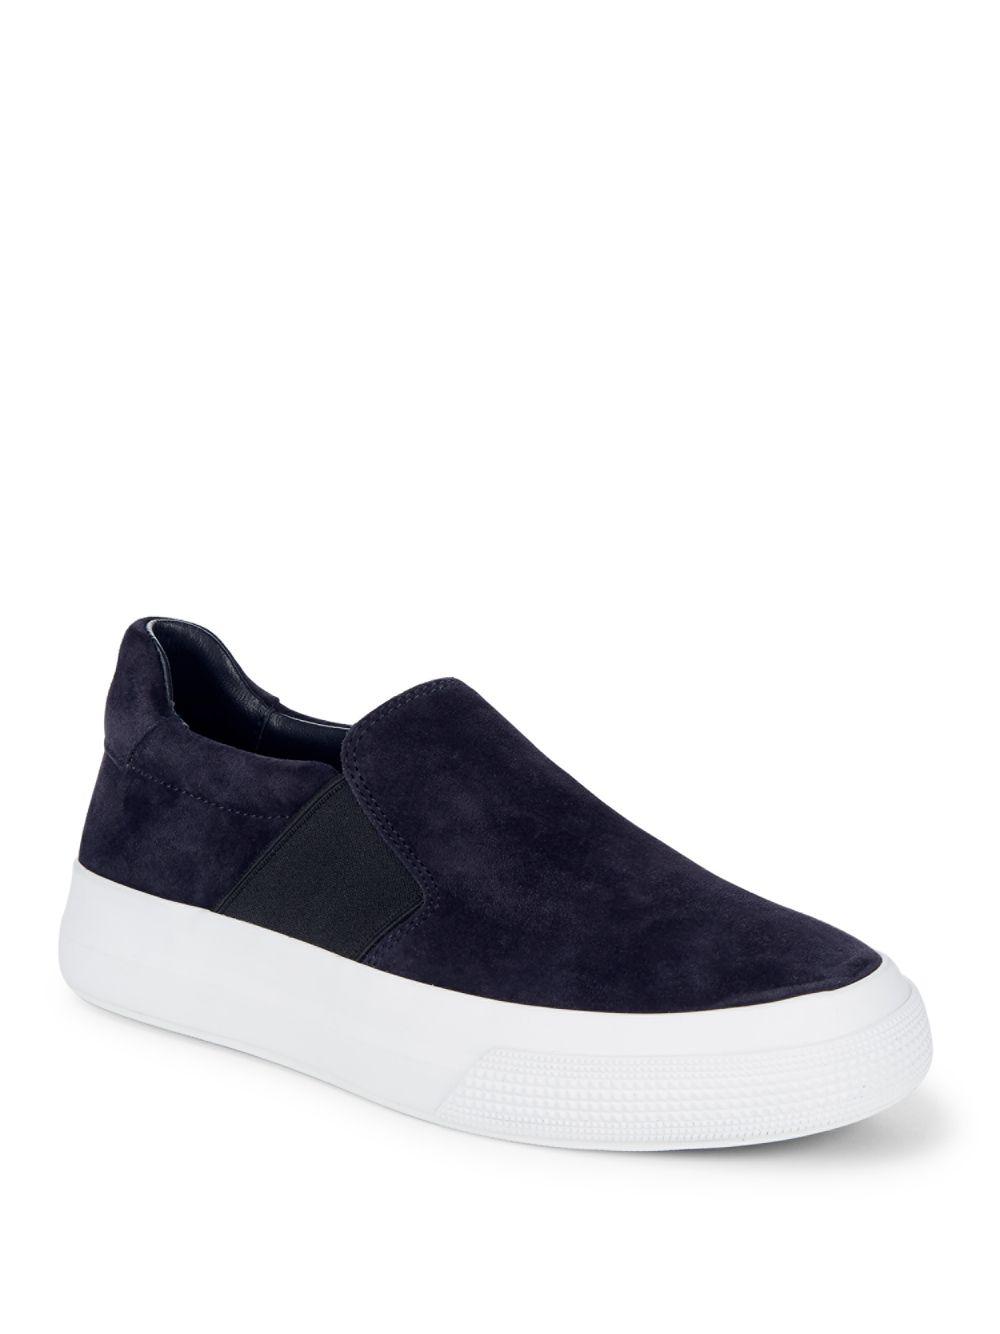 Lyst - Vince Torin Textured Slip-on Sneakers in Blue